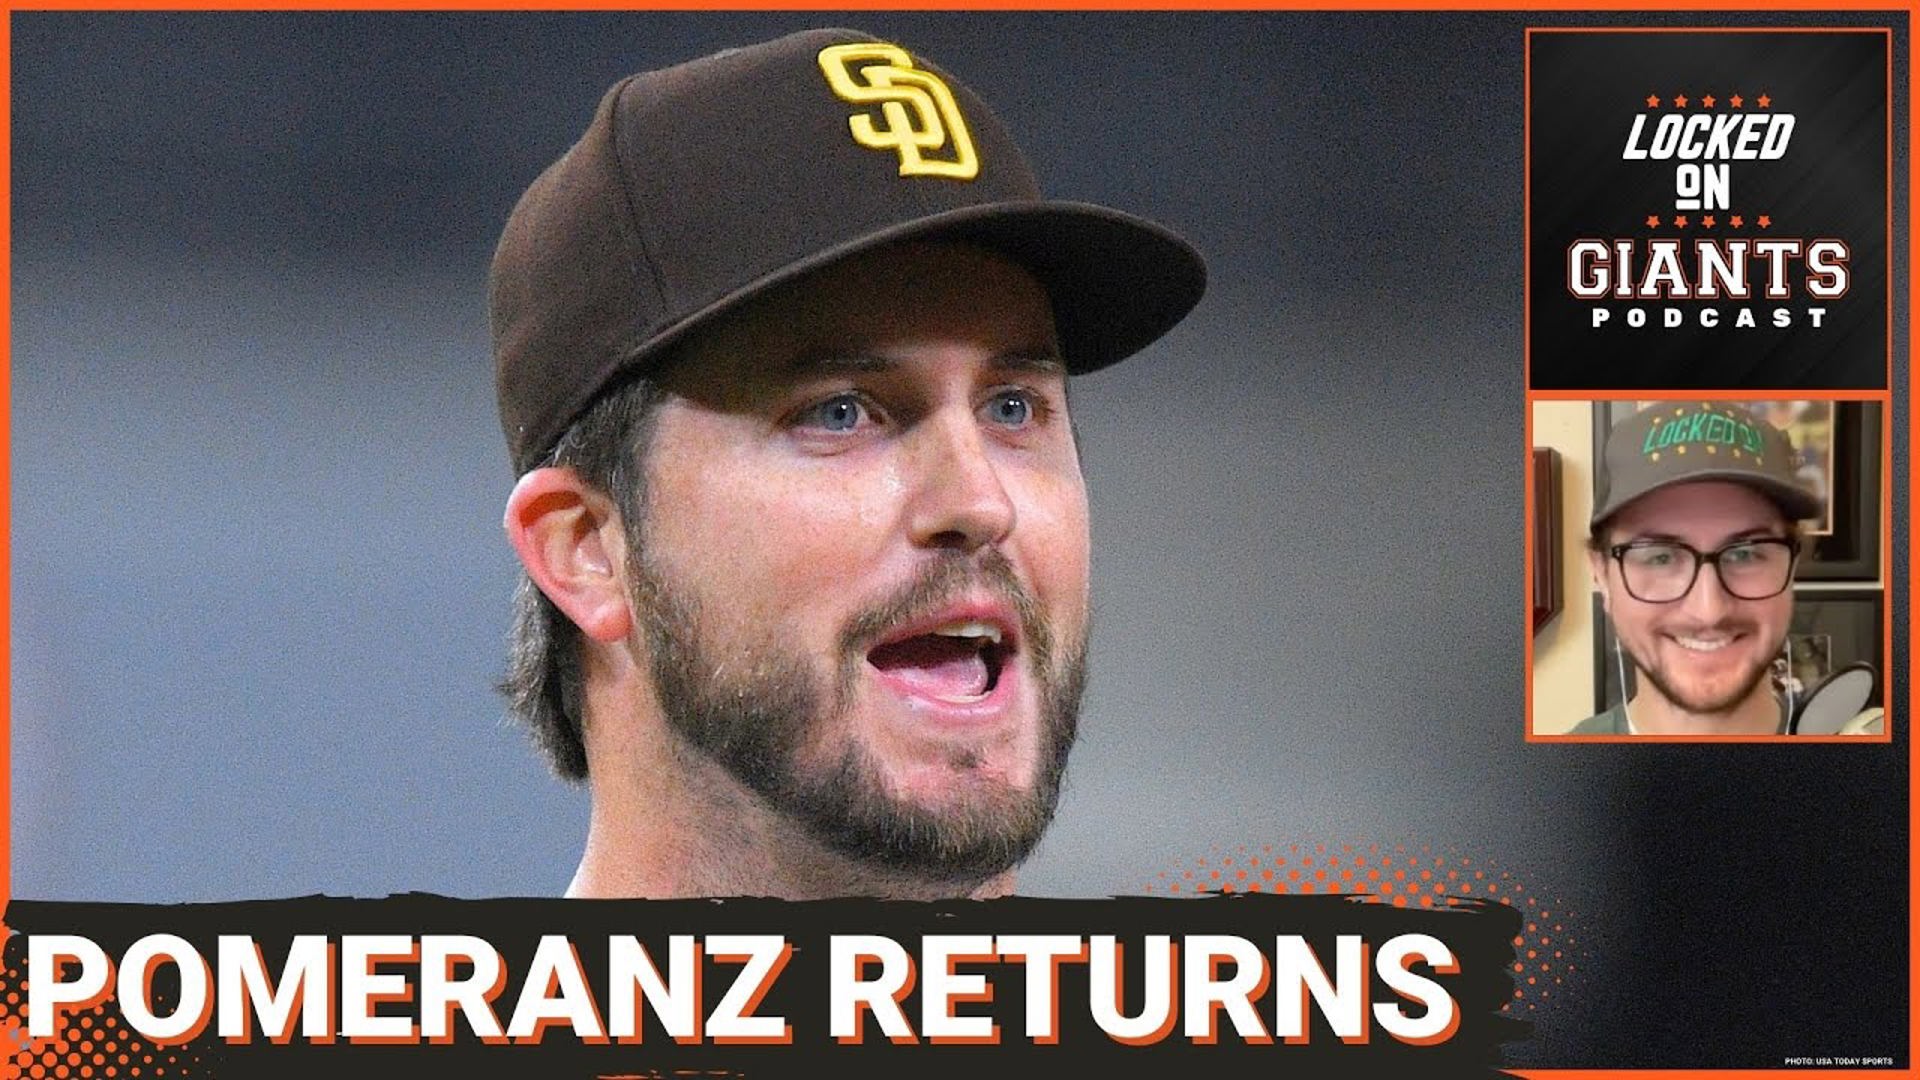 SF Giants Sign Old Friend Drew Pomeranz to MLB Deal, Shoring Up Lefty Relief Corps